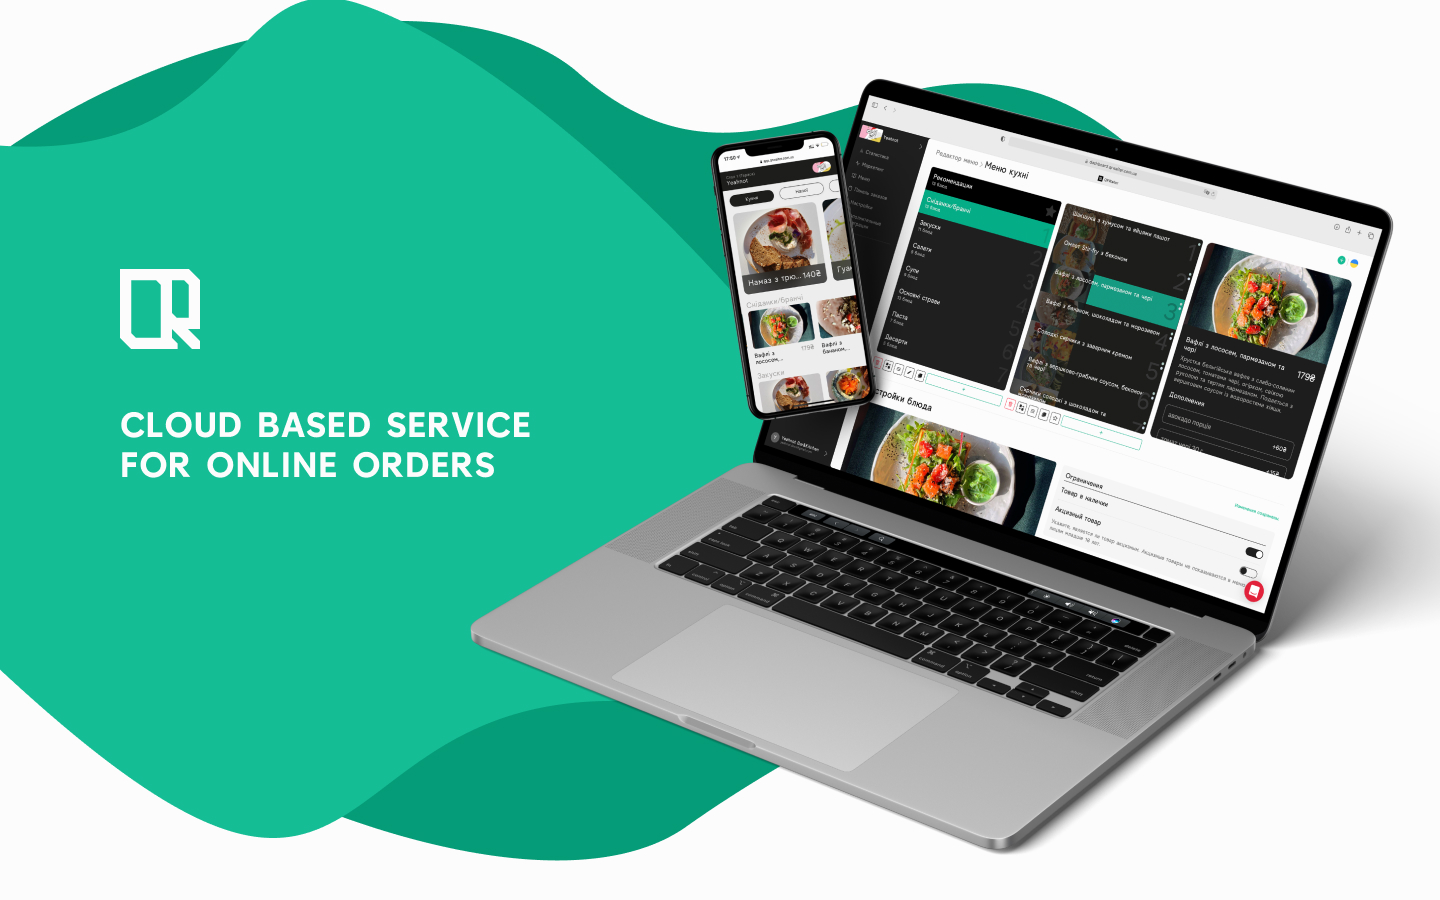 Cloud based service for online orders